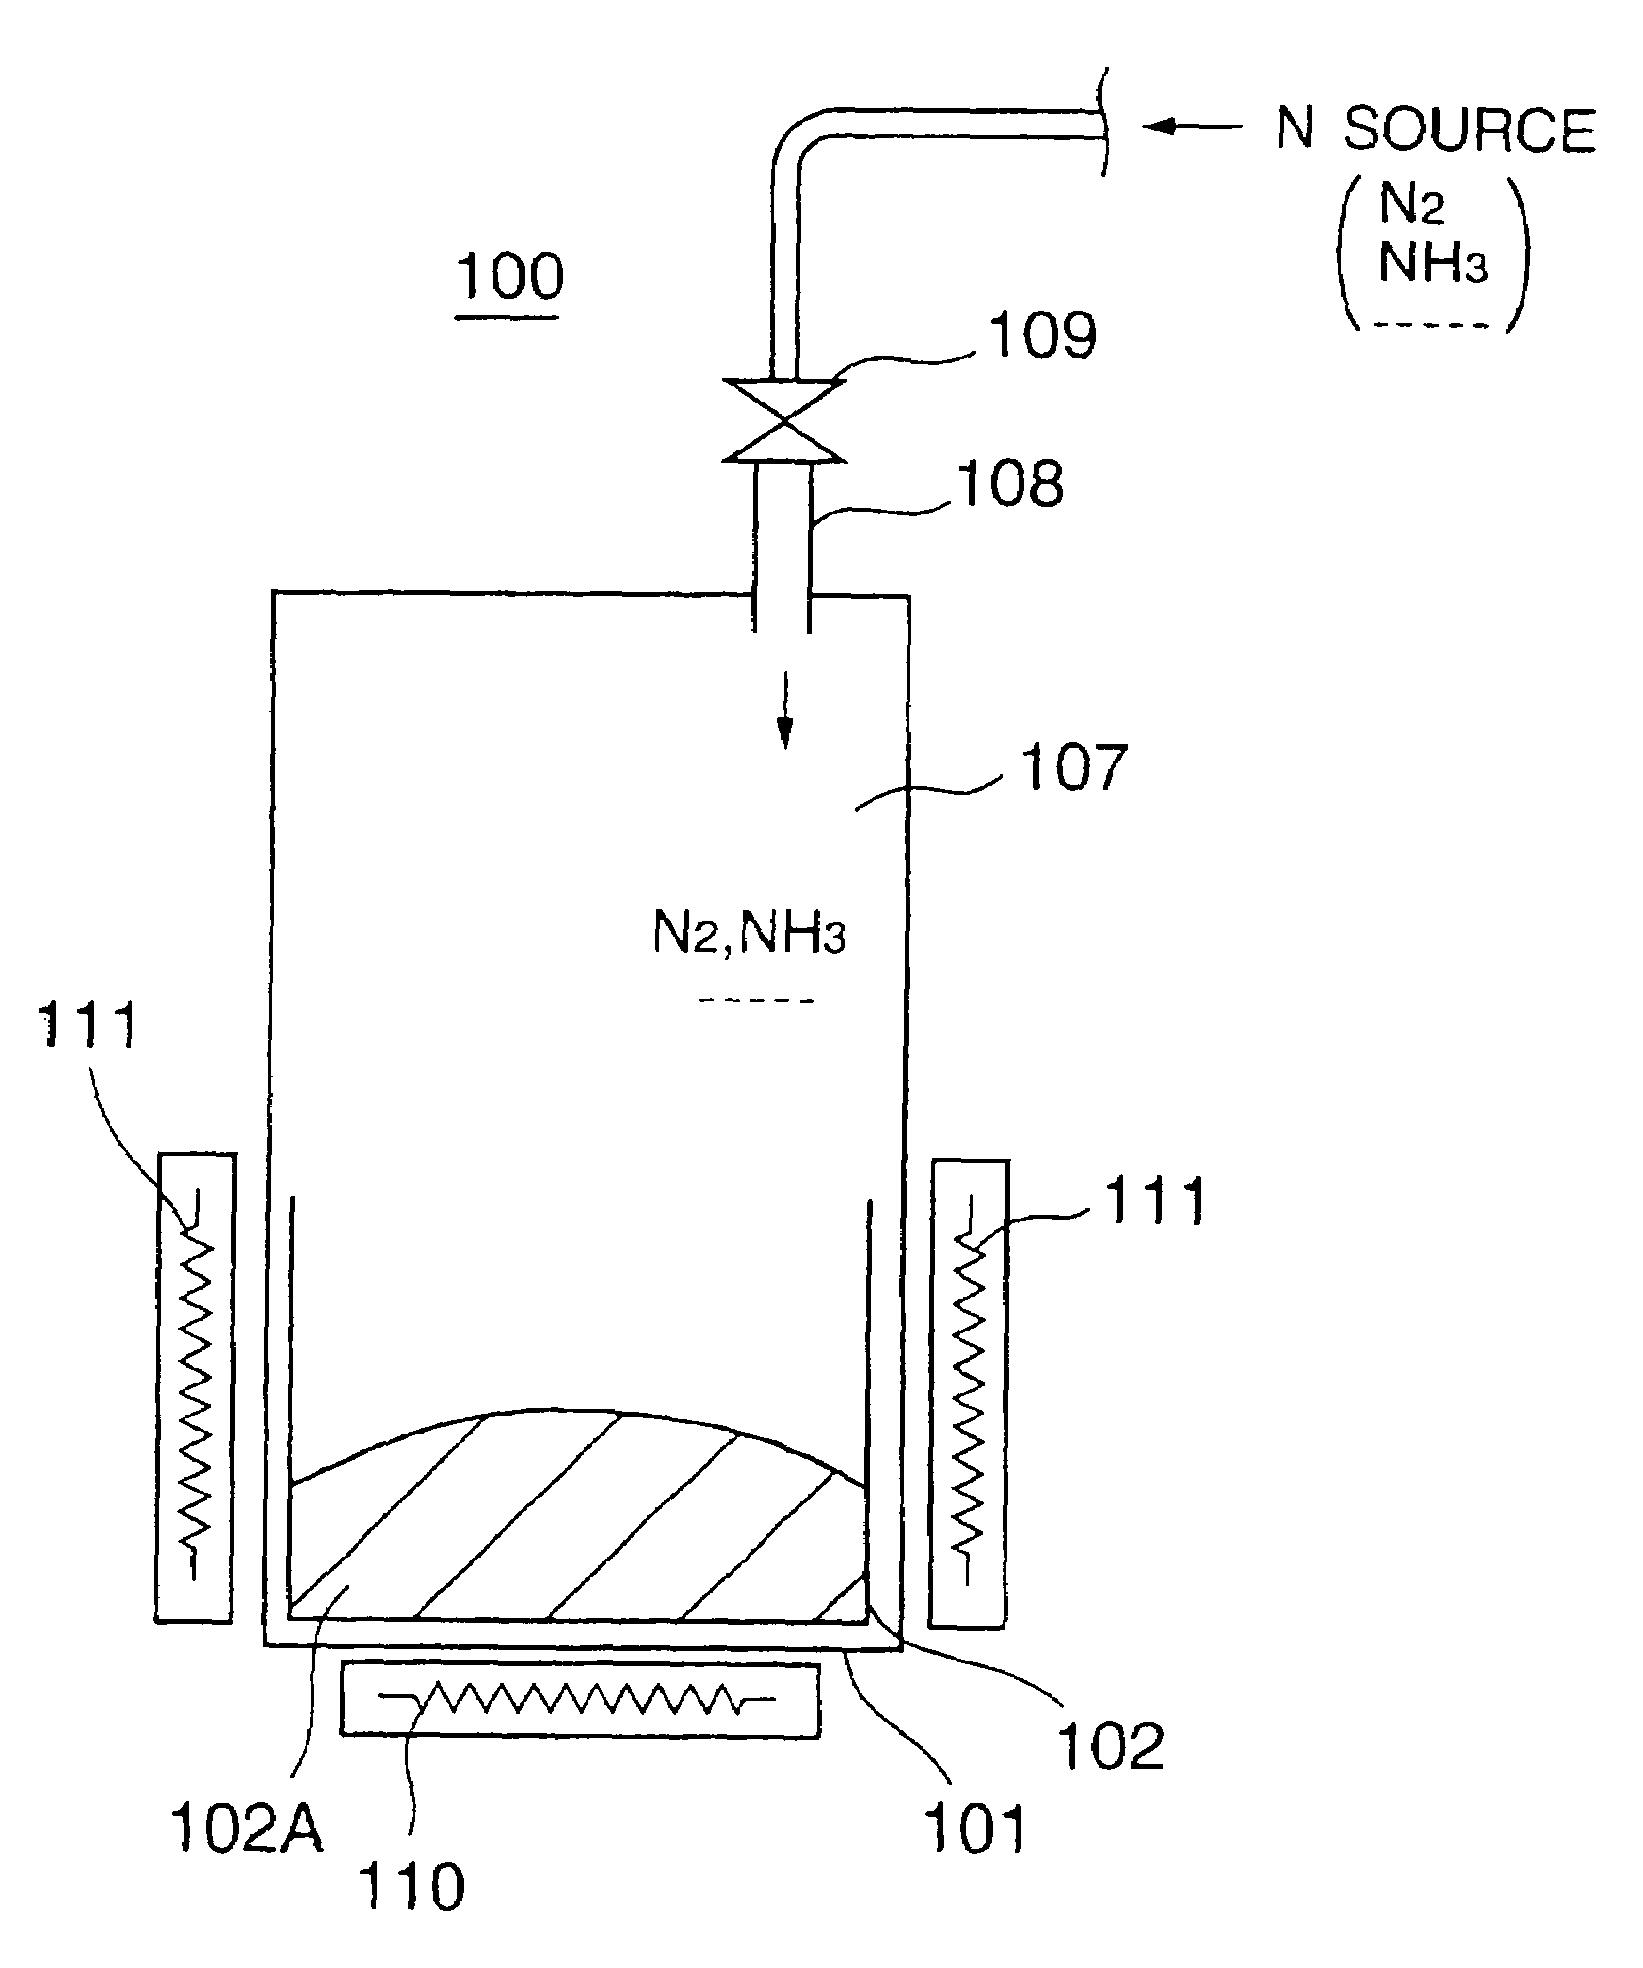 Production of a GaN bulk crystal substrate and a semiconductor device formed on a GaN bulk crystal substrate